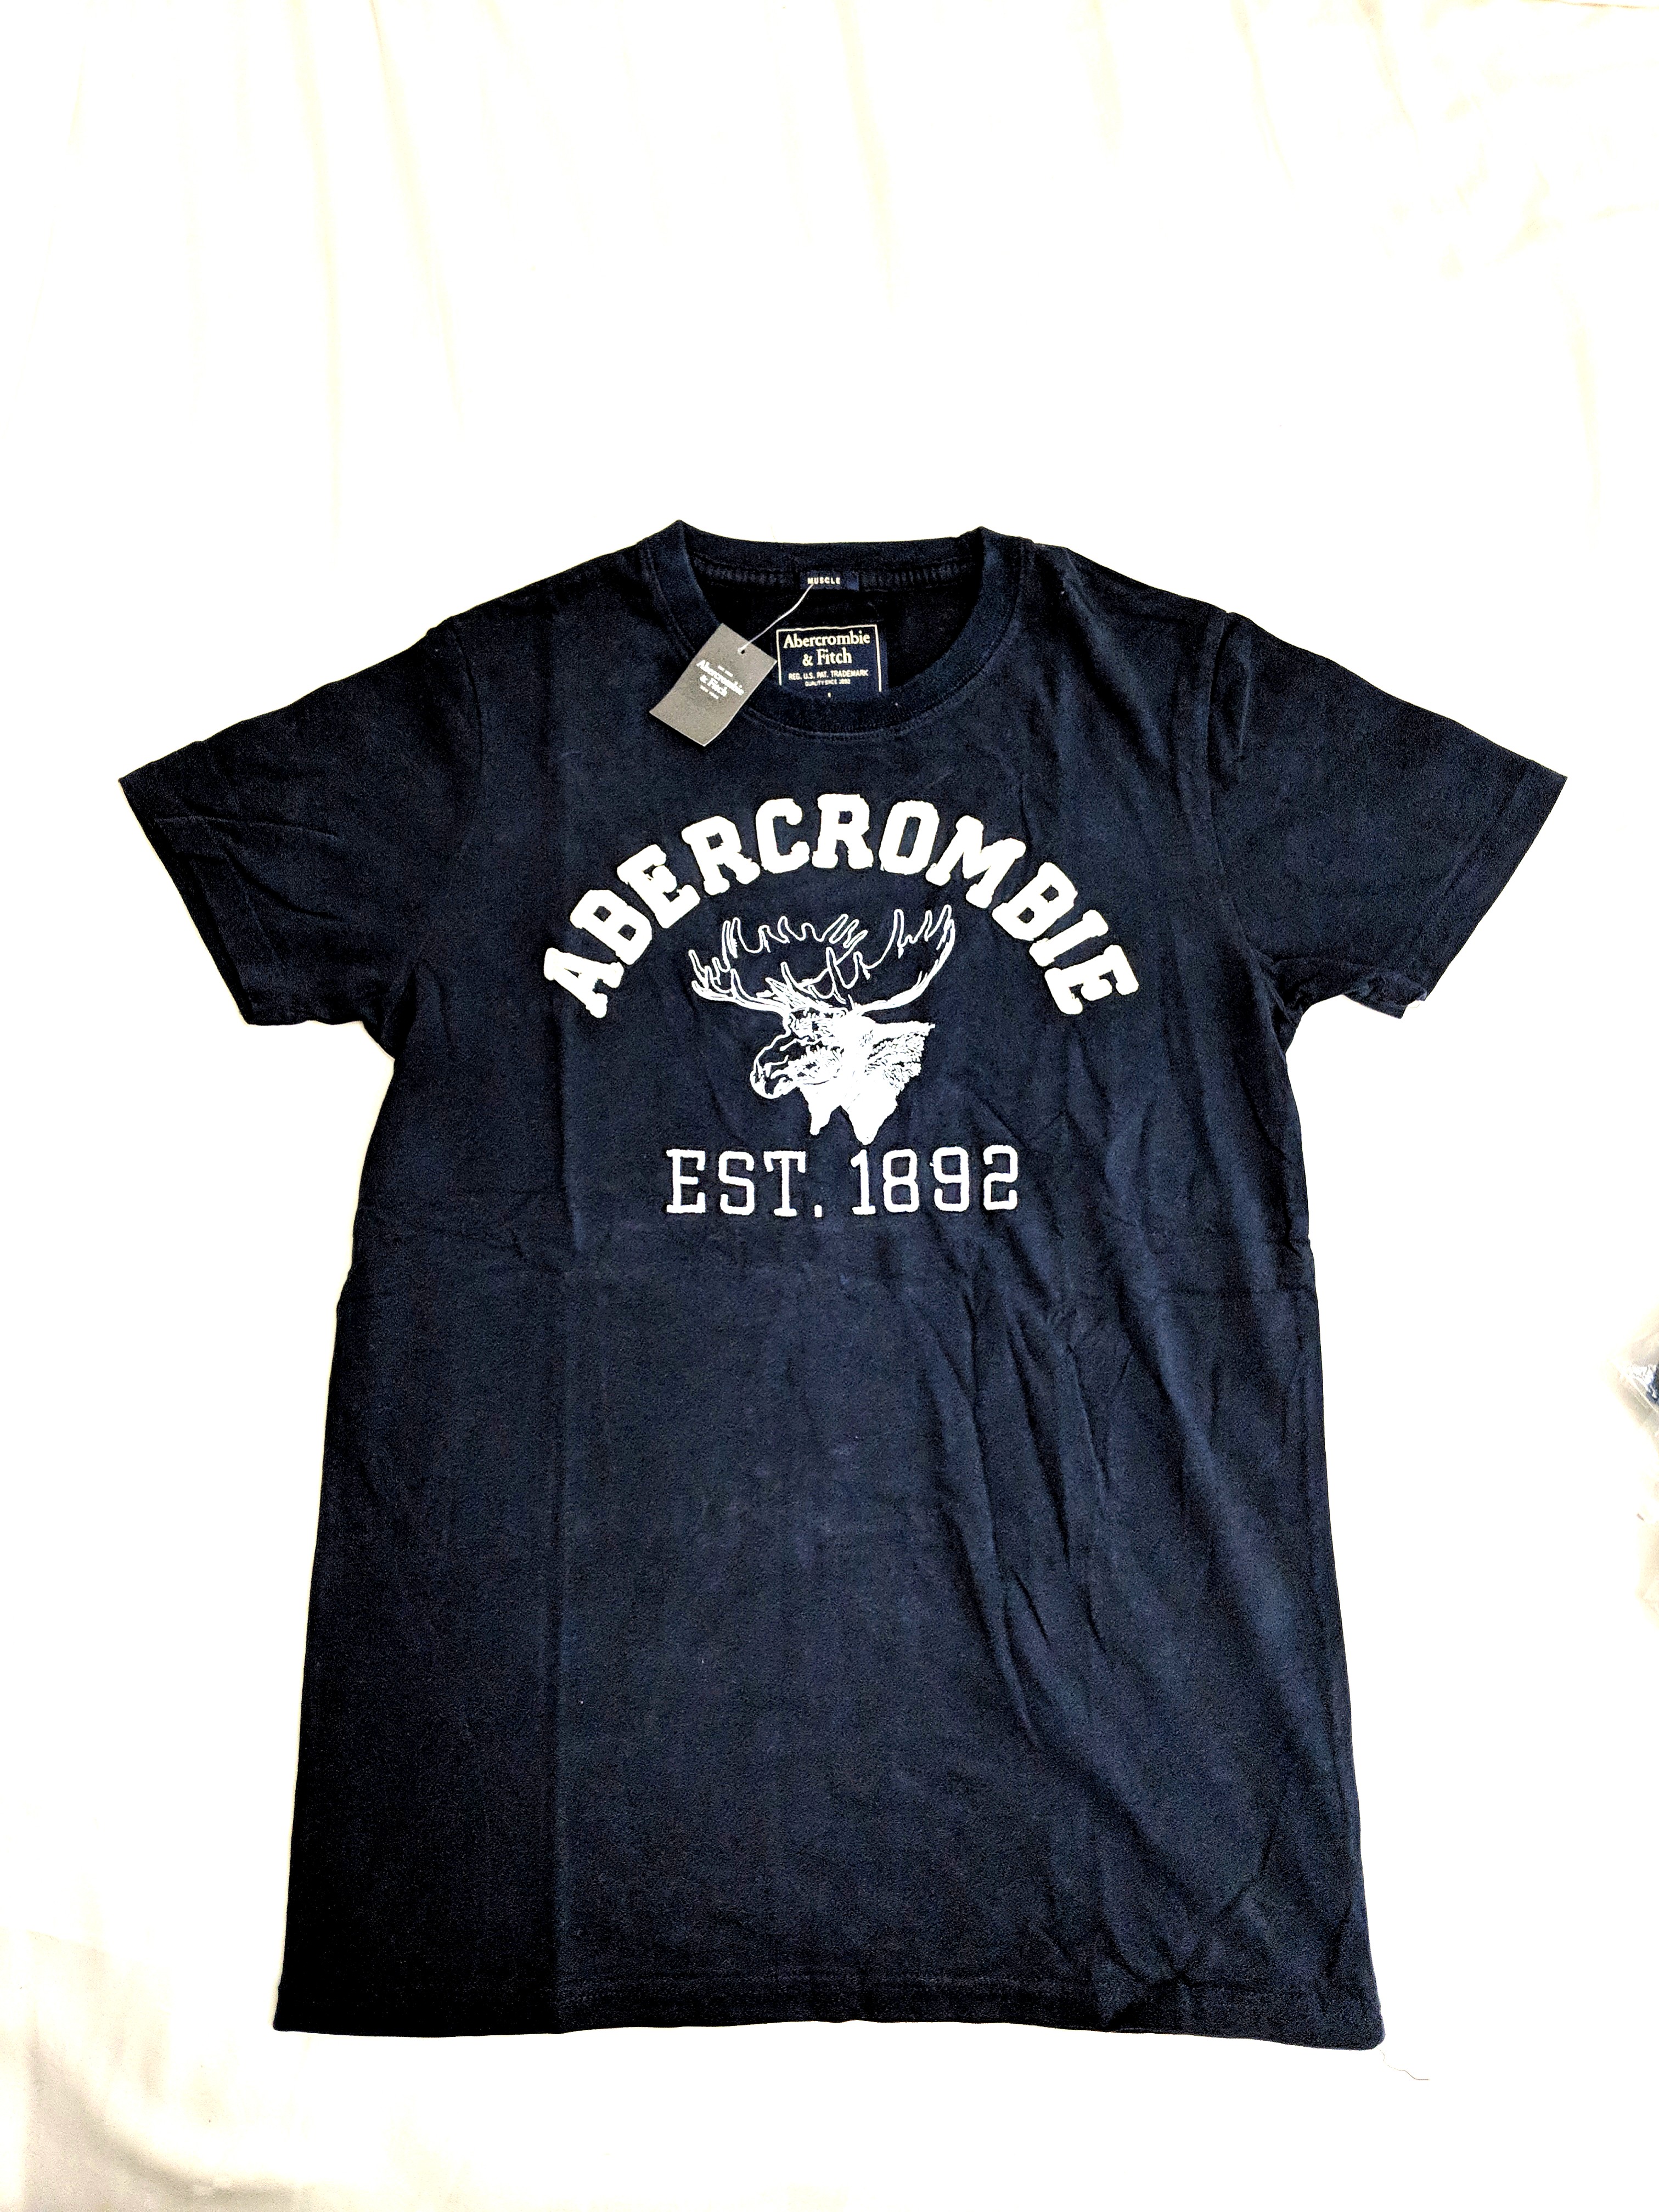 what did abercrombie and fitch originally sell